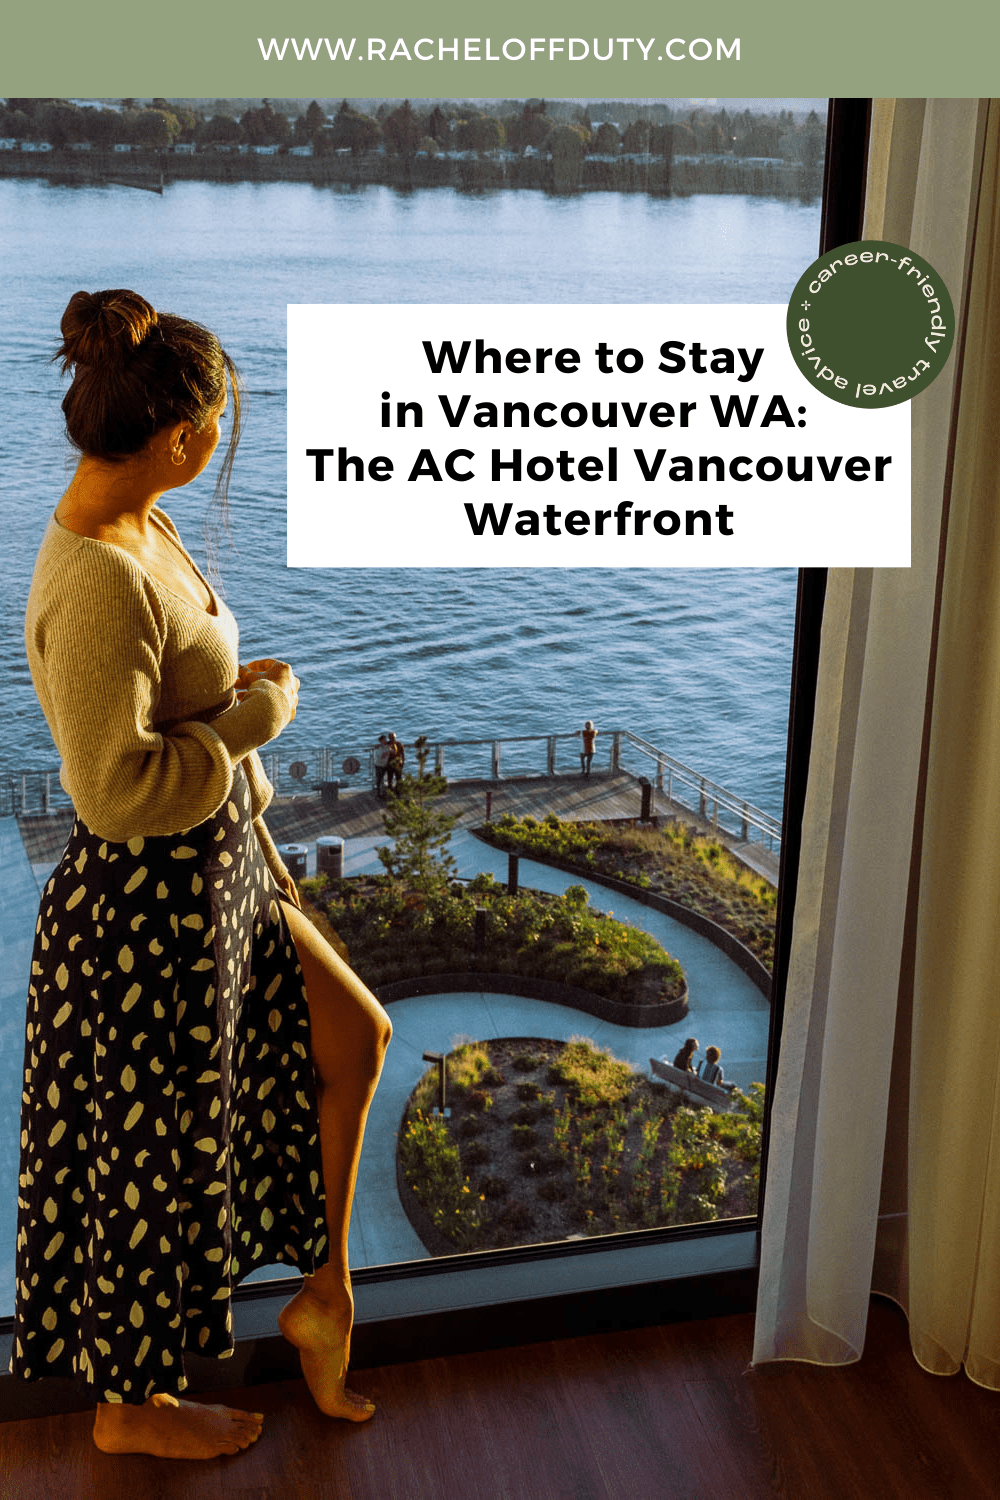 Where to Stay in Vancouver WA: The AC Hotel Vancouver Waterfront - Rachel Off Duty